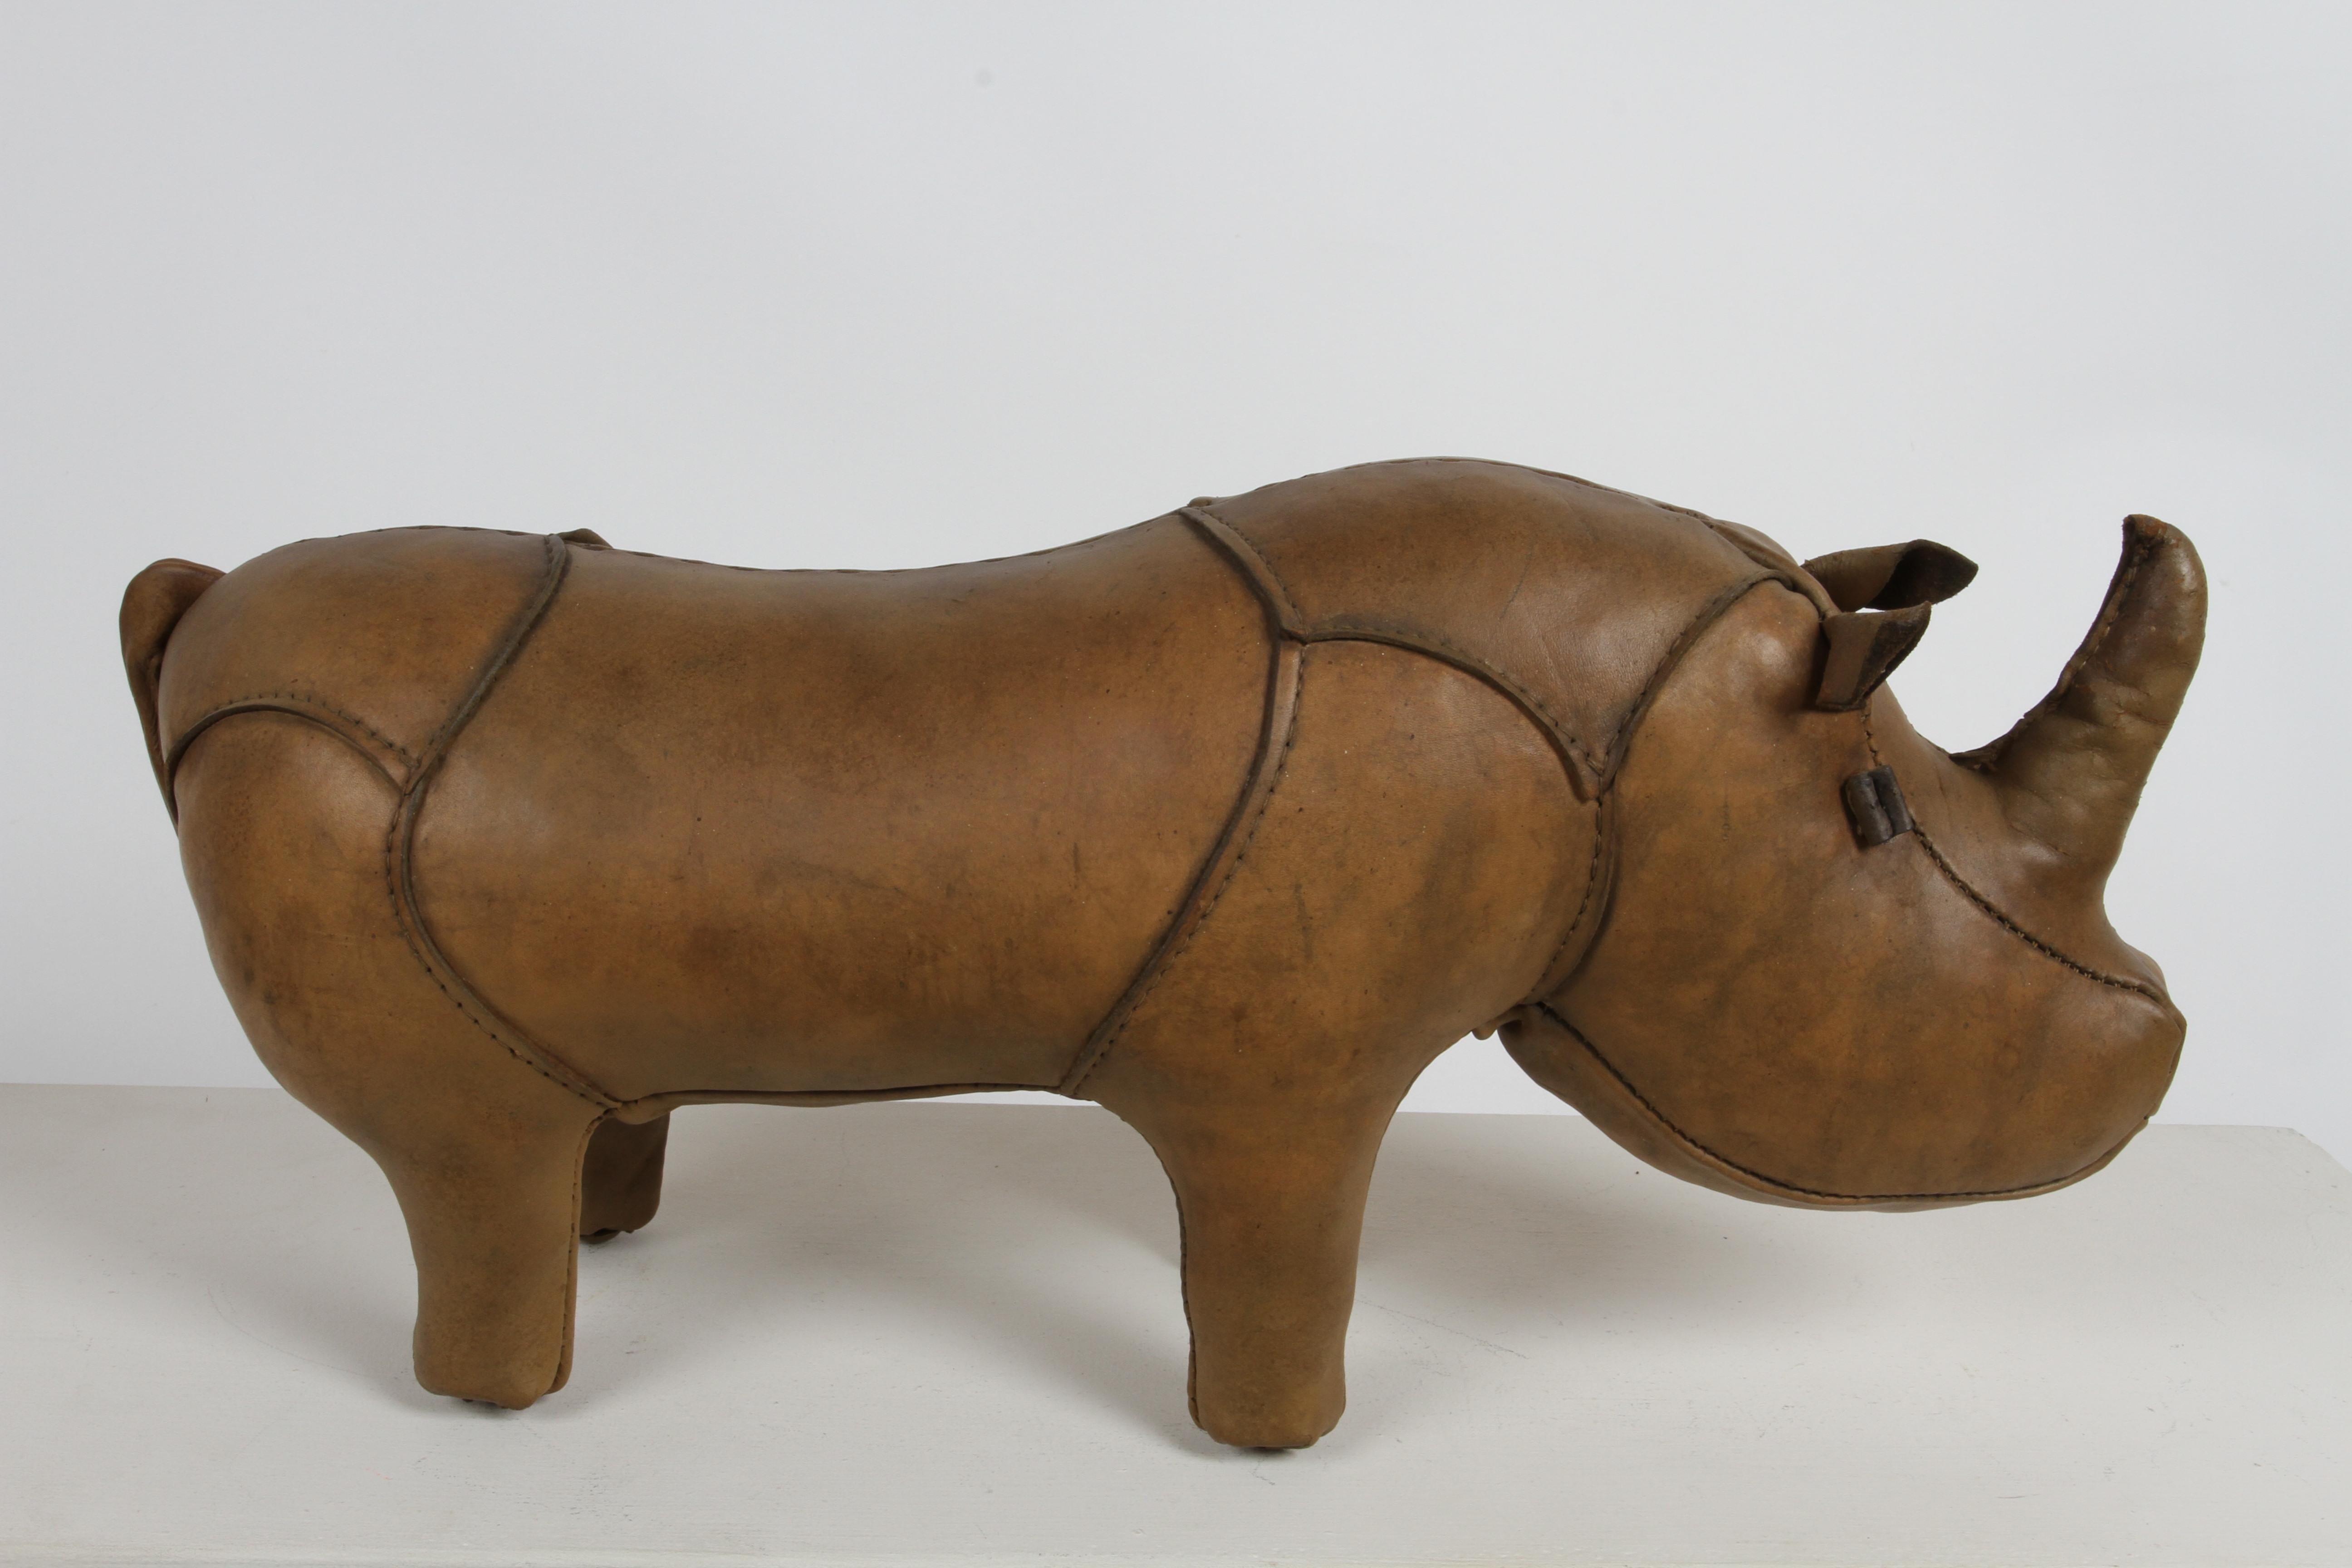 1960s Dimitri Omersa Leather Rhino Retailed by Abercrombie & Fitch - Restored For Sale 2